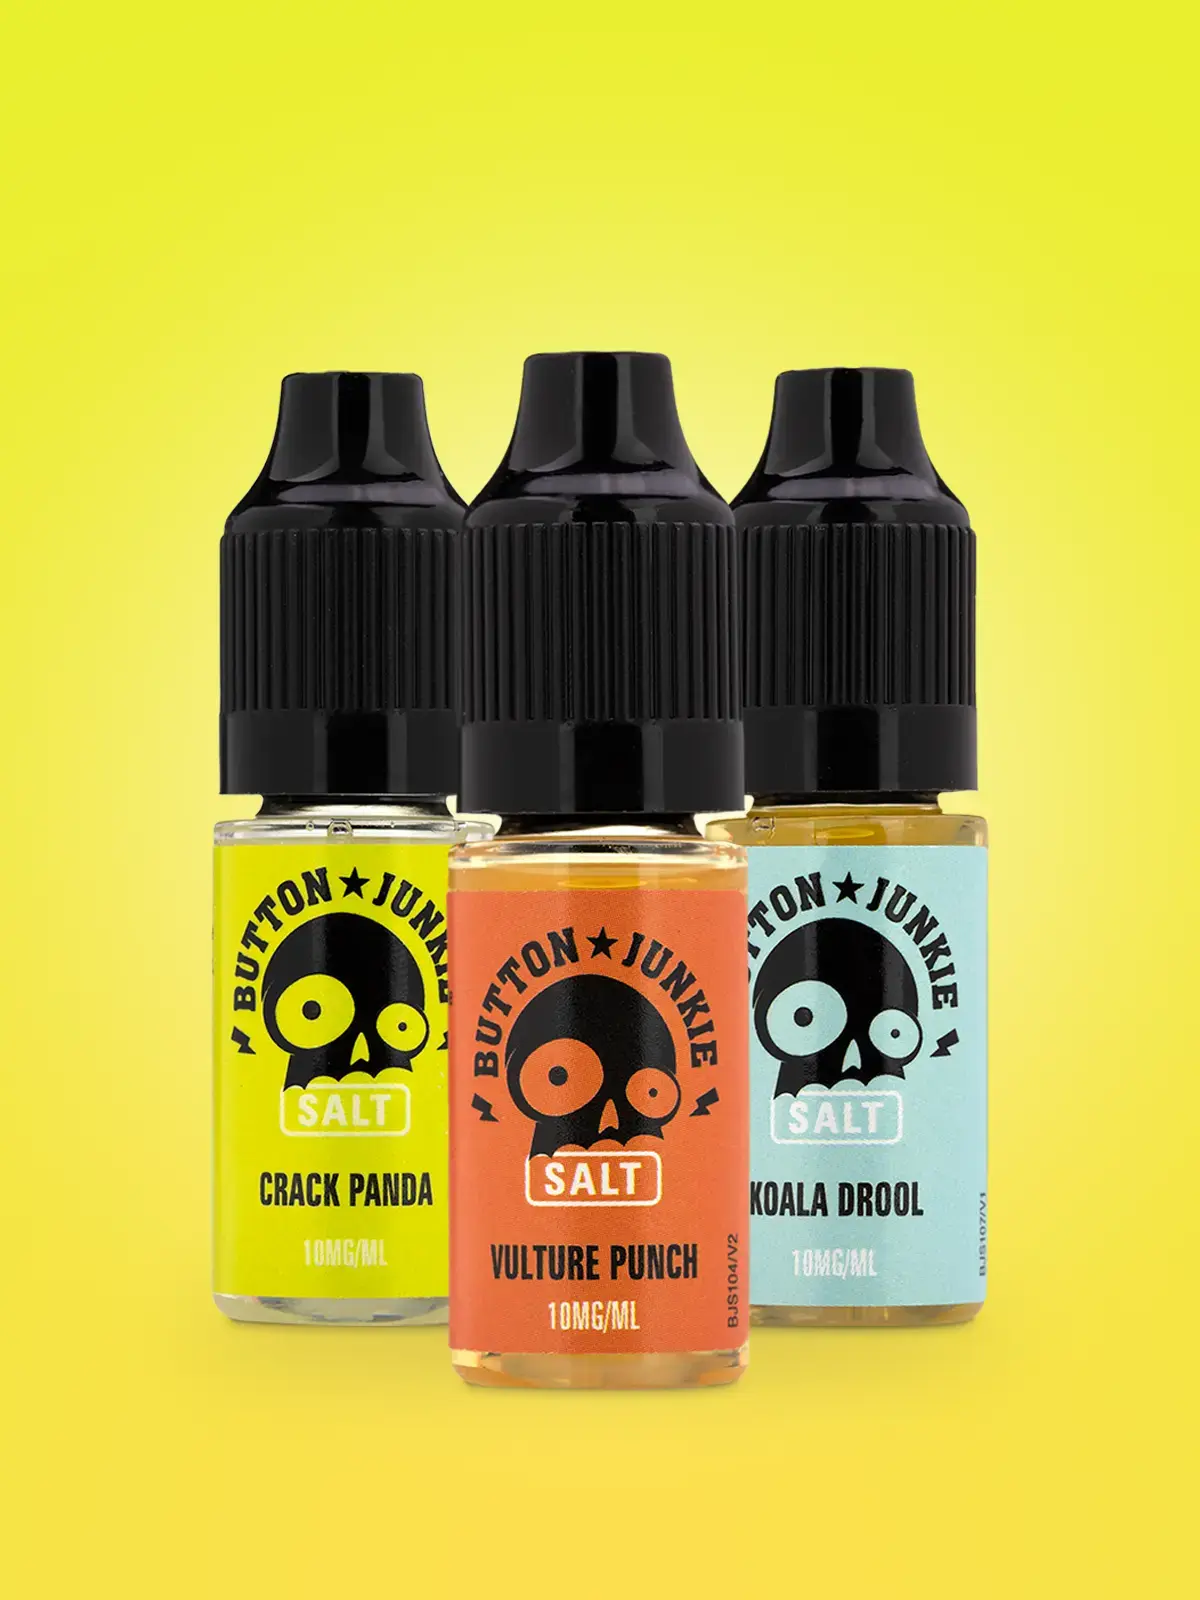 Three bottles of Button Junkie e-liquid; Crack Panda, Vulture Punch and Koala Drool in front of a yellow background